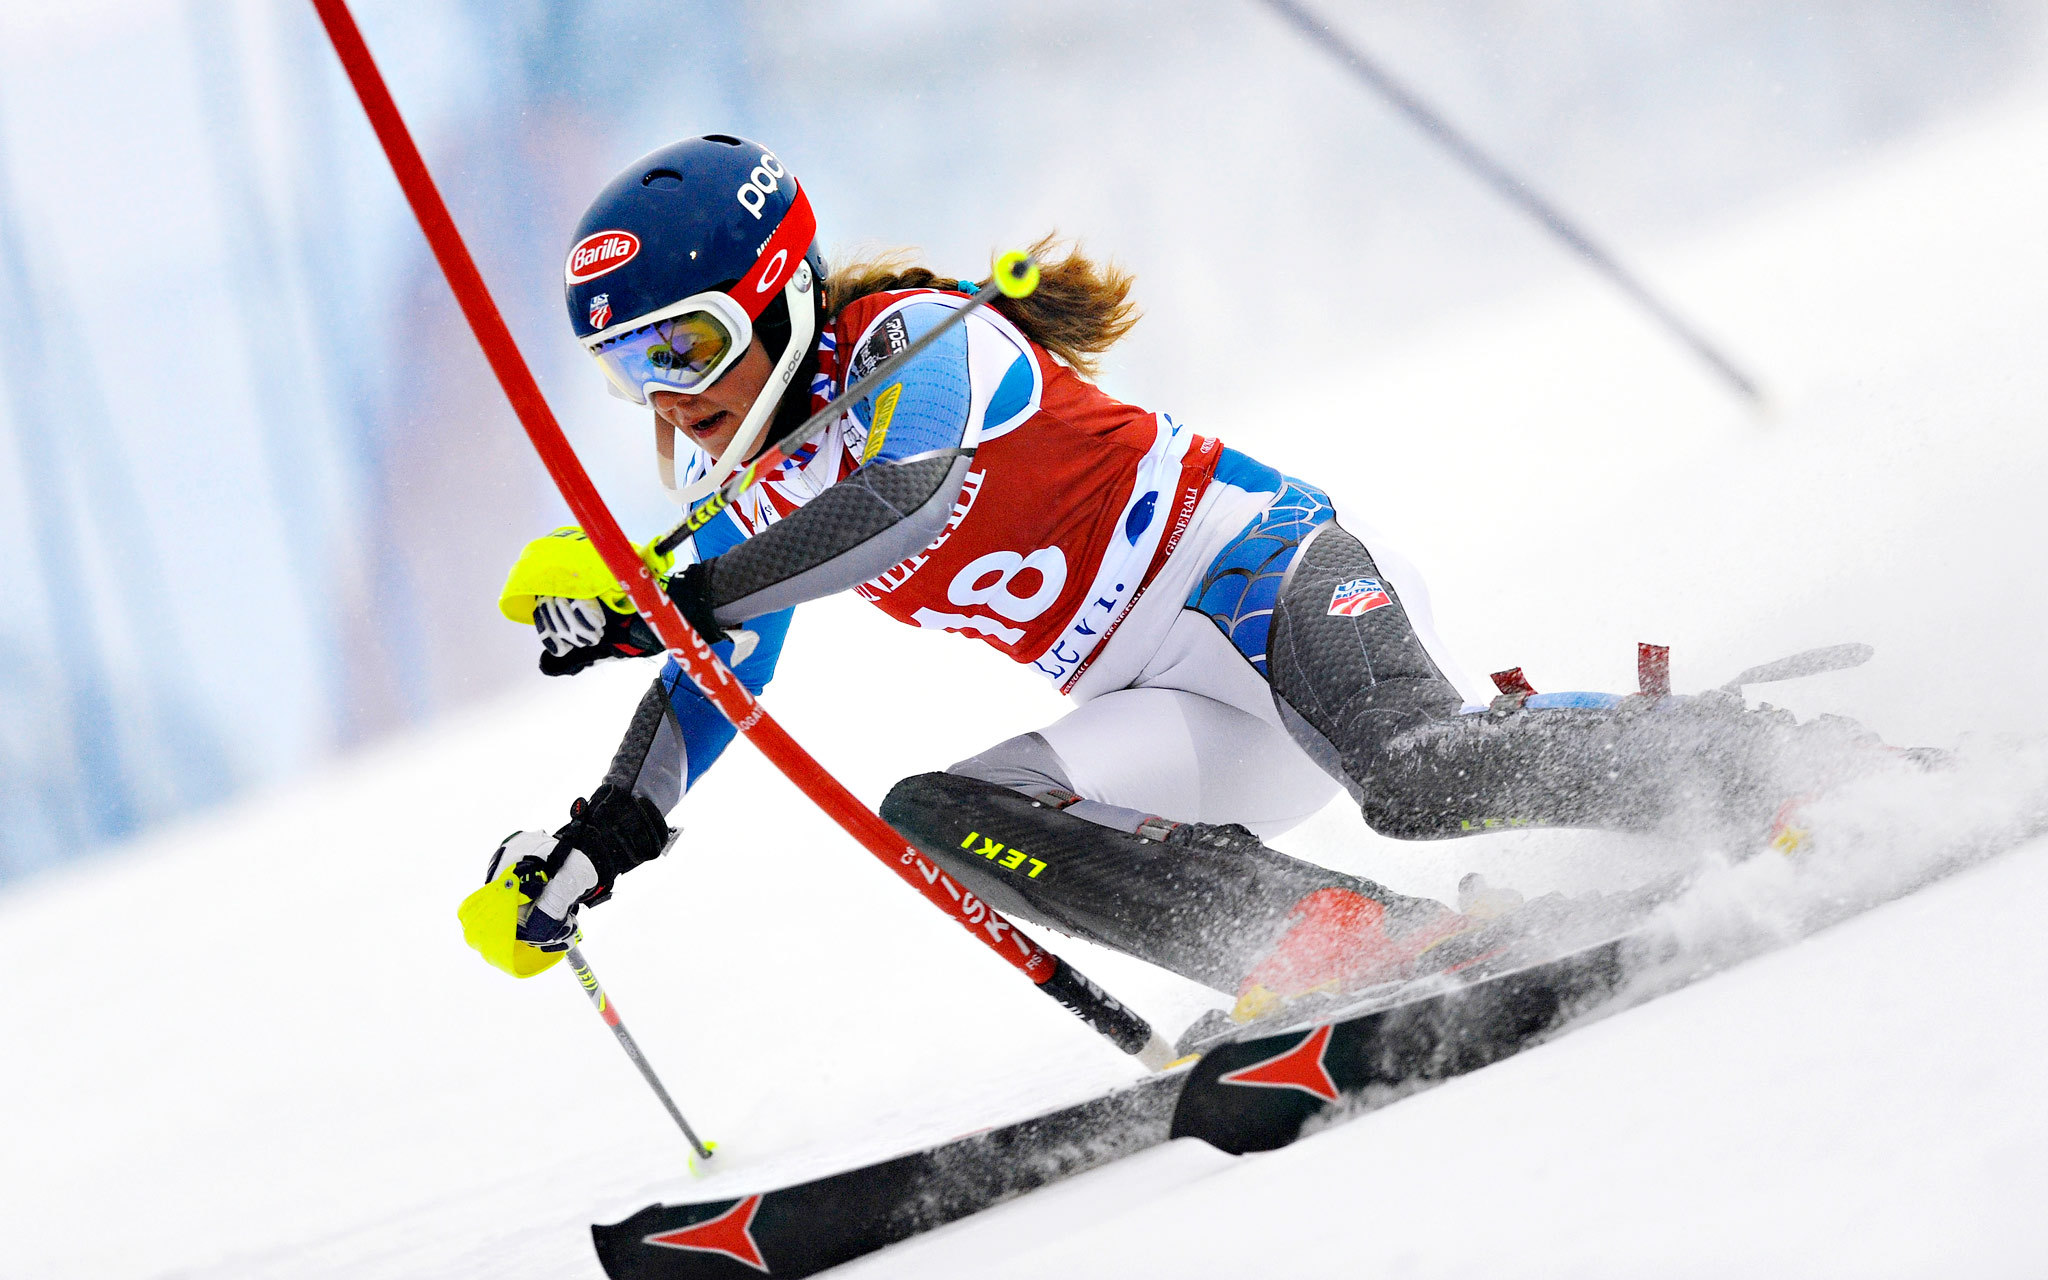 American Gold Medalist Skier Mikaela Shiffrin At The